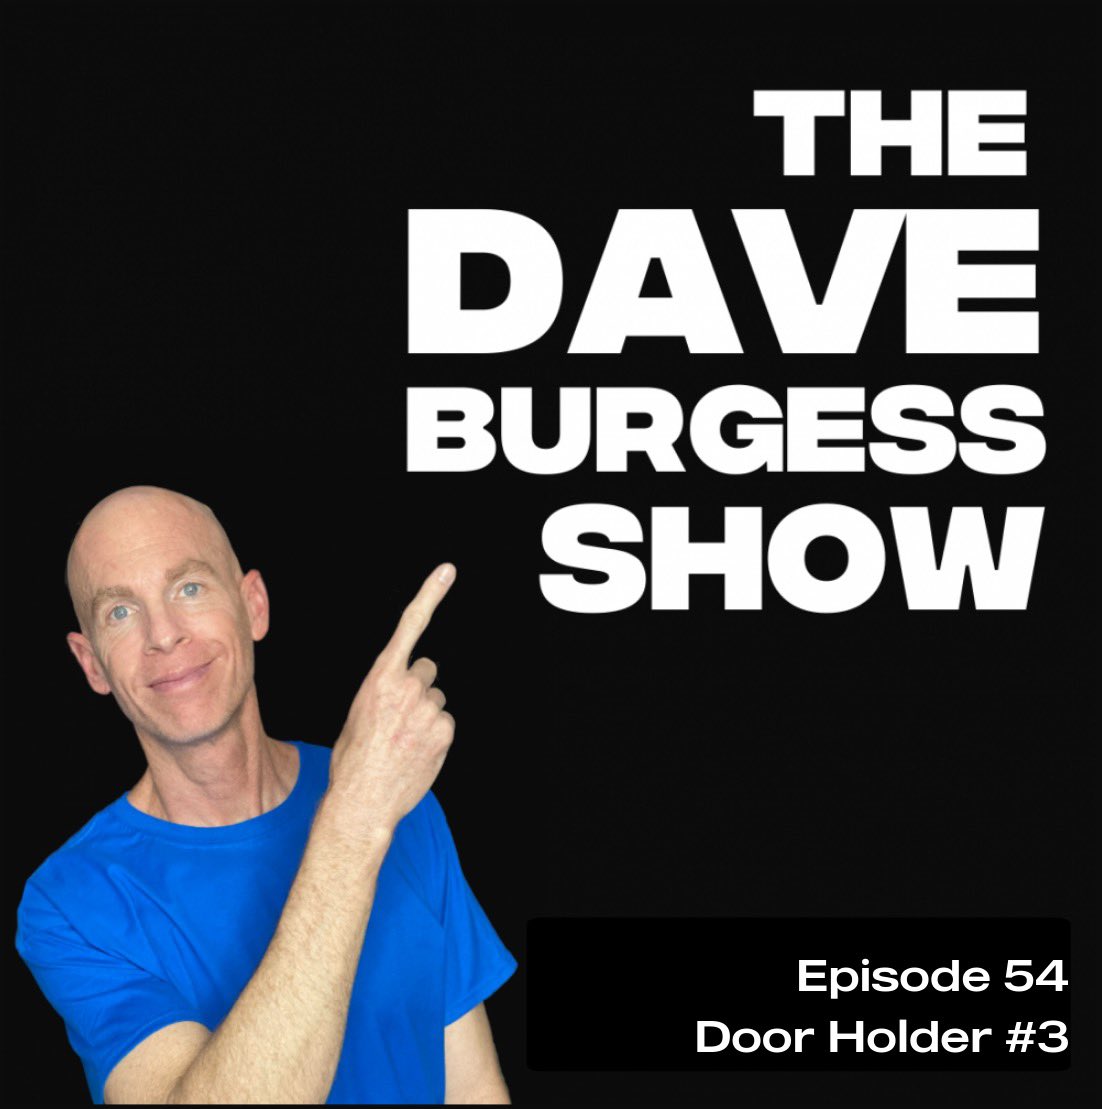 Episode 54 of the #DaveBurgessShow is up!! We could all benefit from embracing more of a “Door Holder #3” attitude towards life!! thedaveburgessshow.buzzsprout.com/1635715/150821… #dbcincbooks #tlap #leadlap